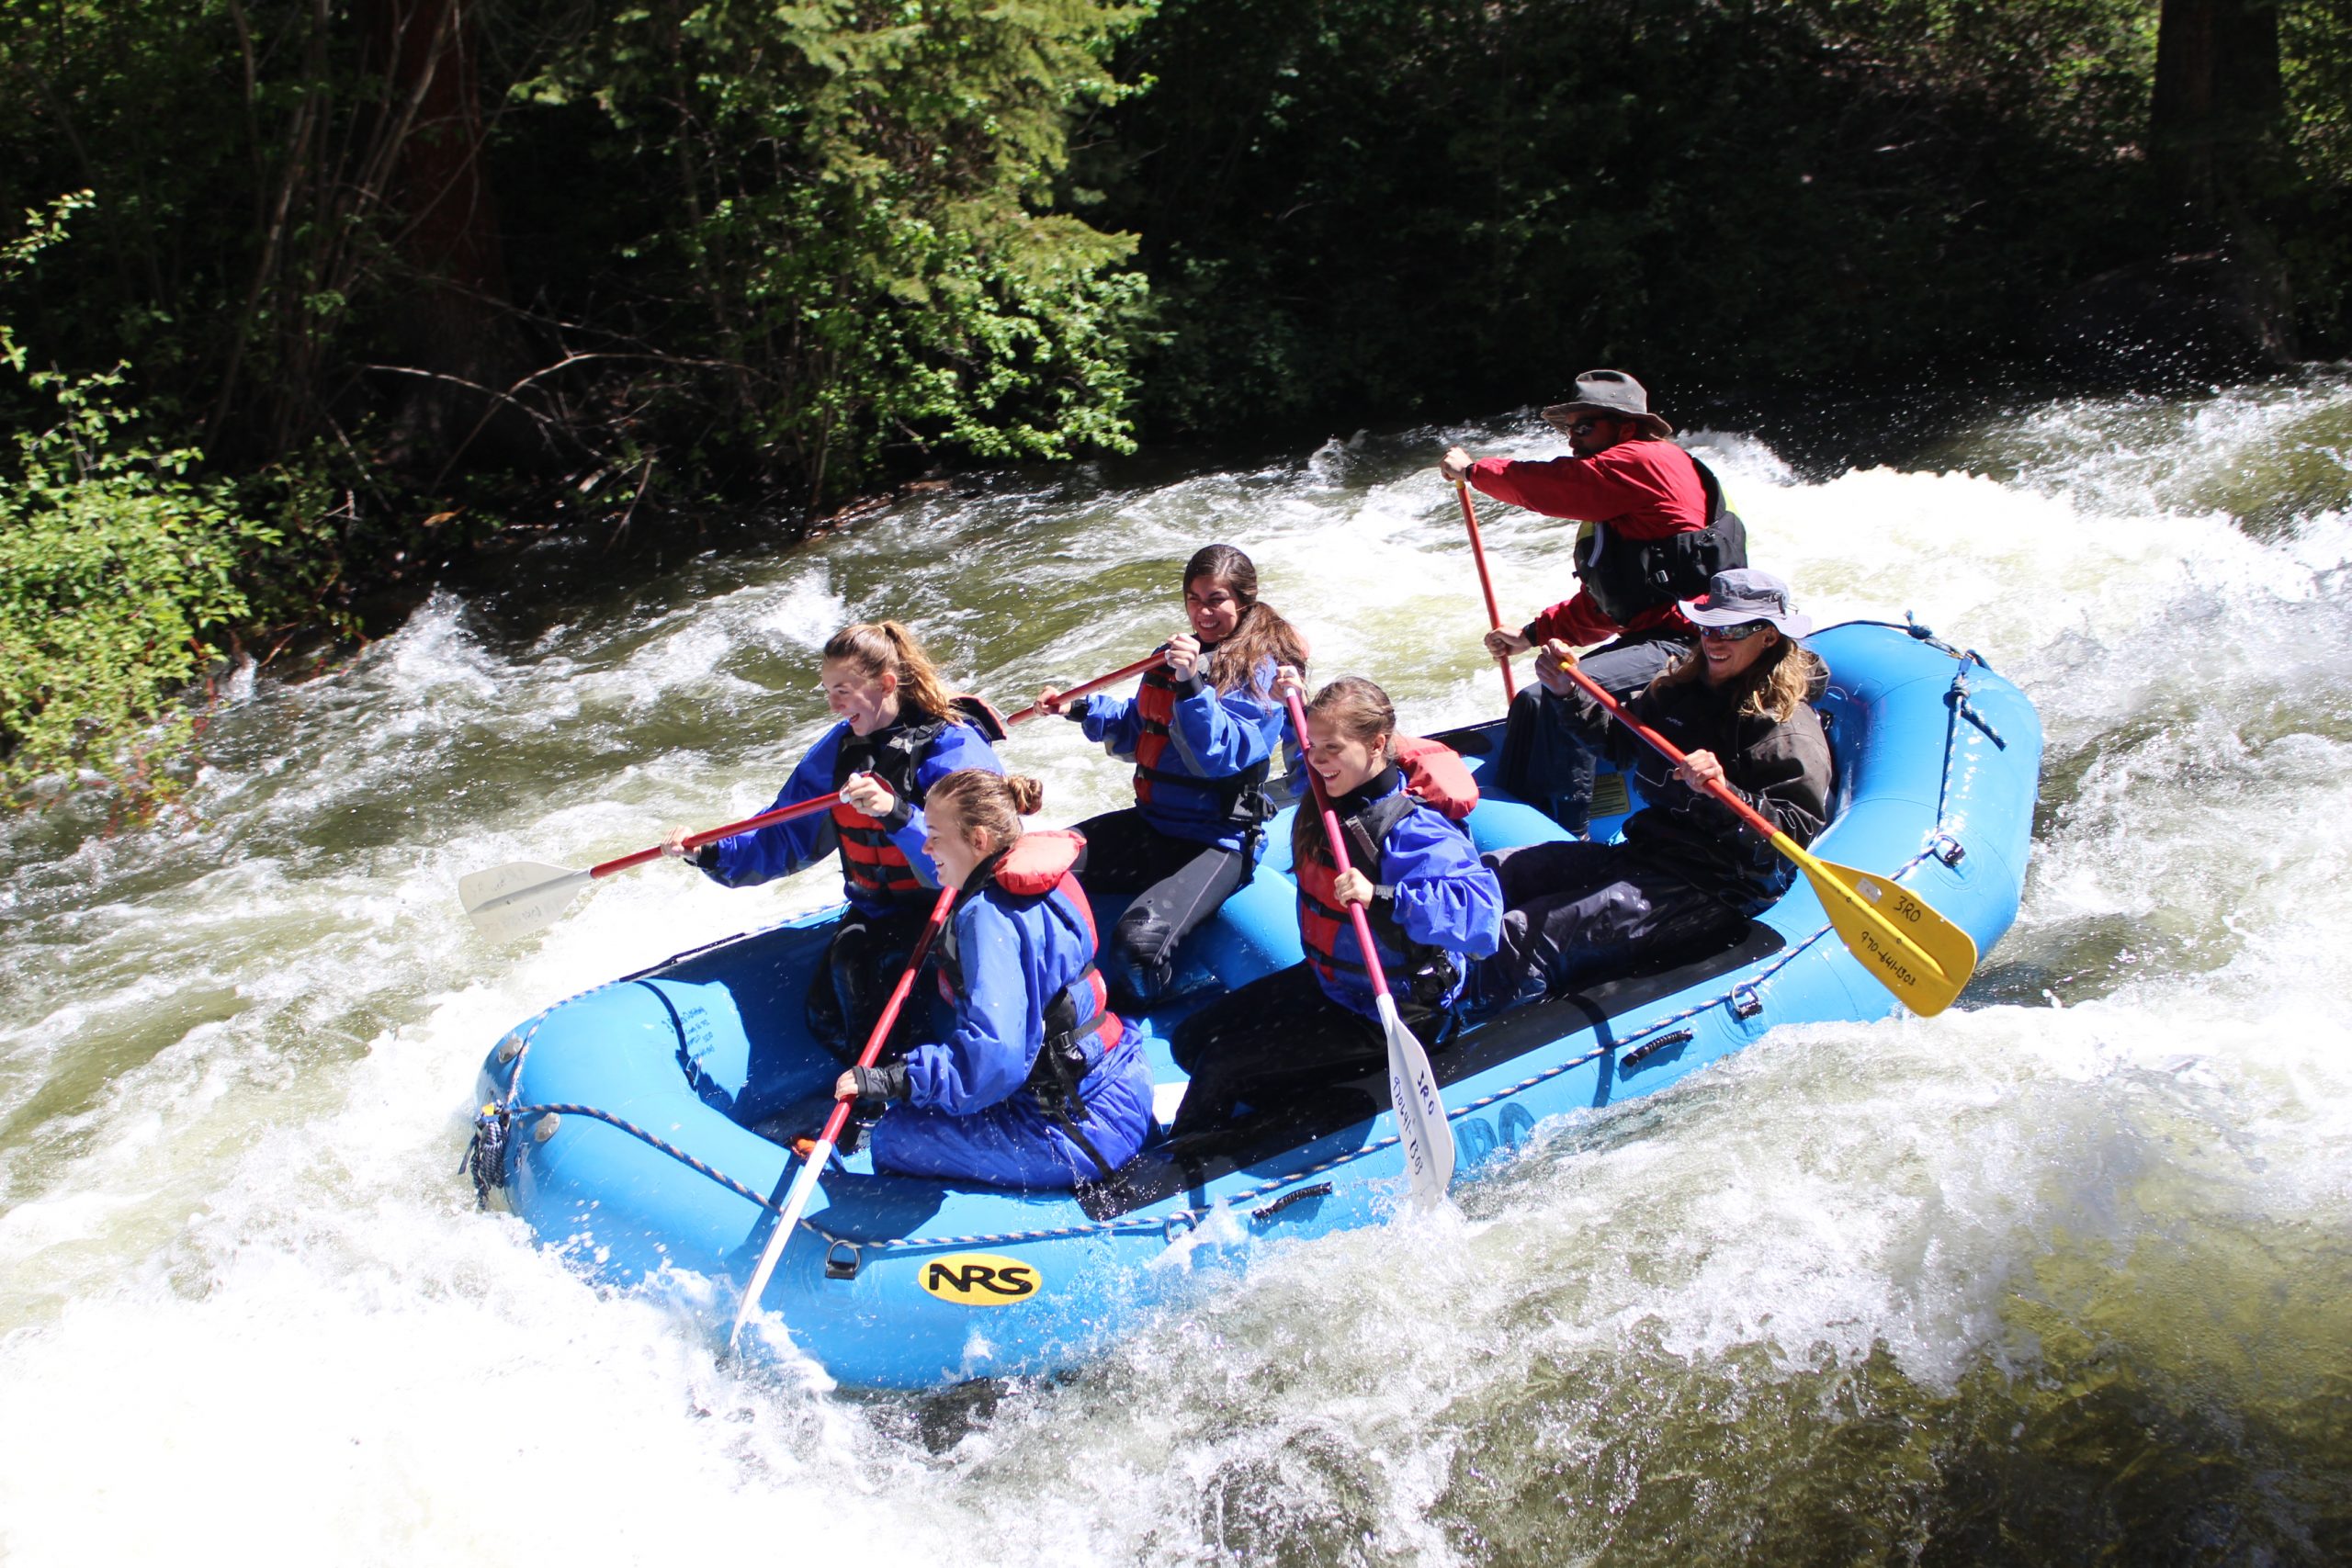 Crested Butte Commercial Whitewater Rafting Six people paddle a blue raft through a large wave on a river.